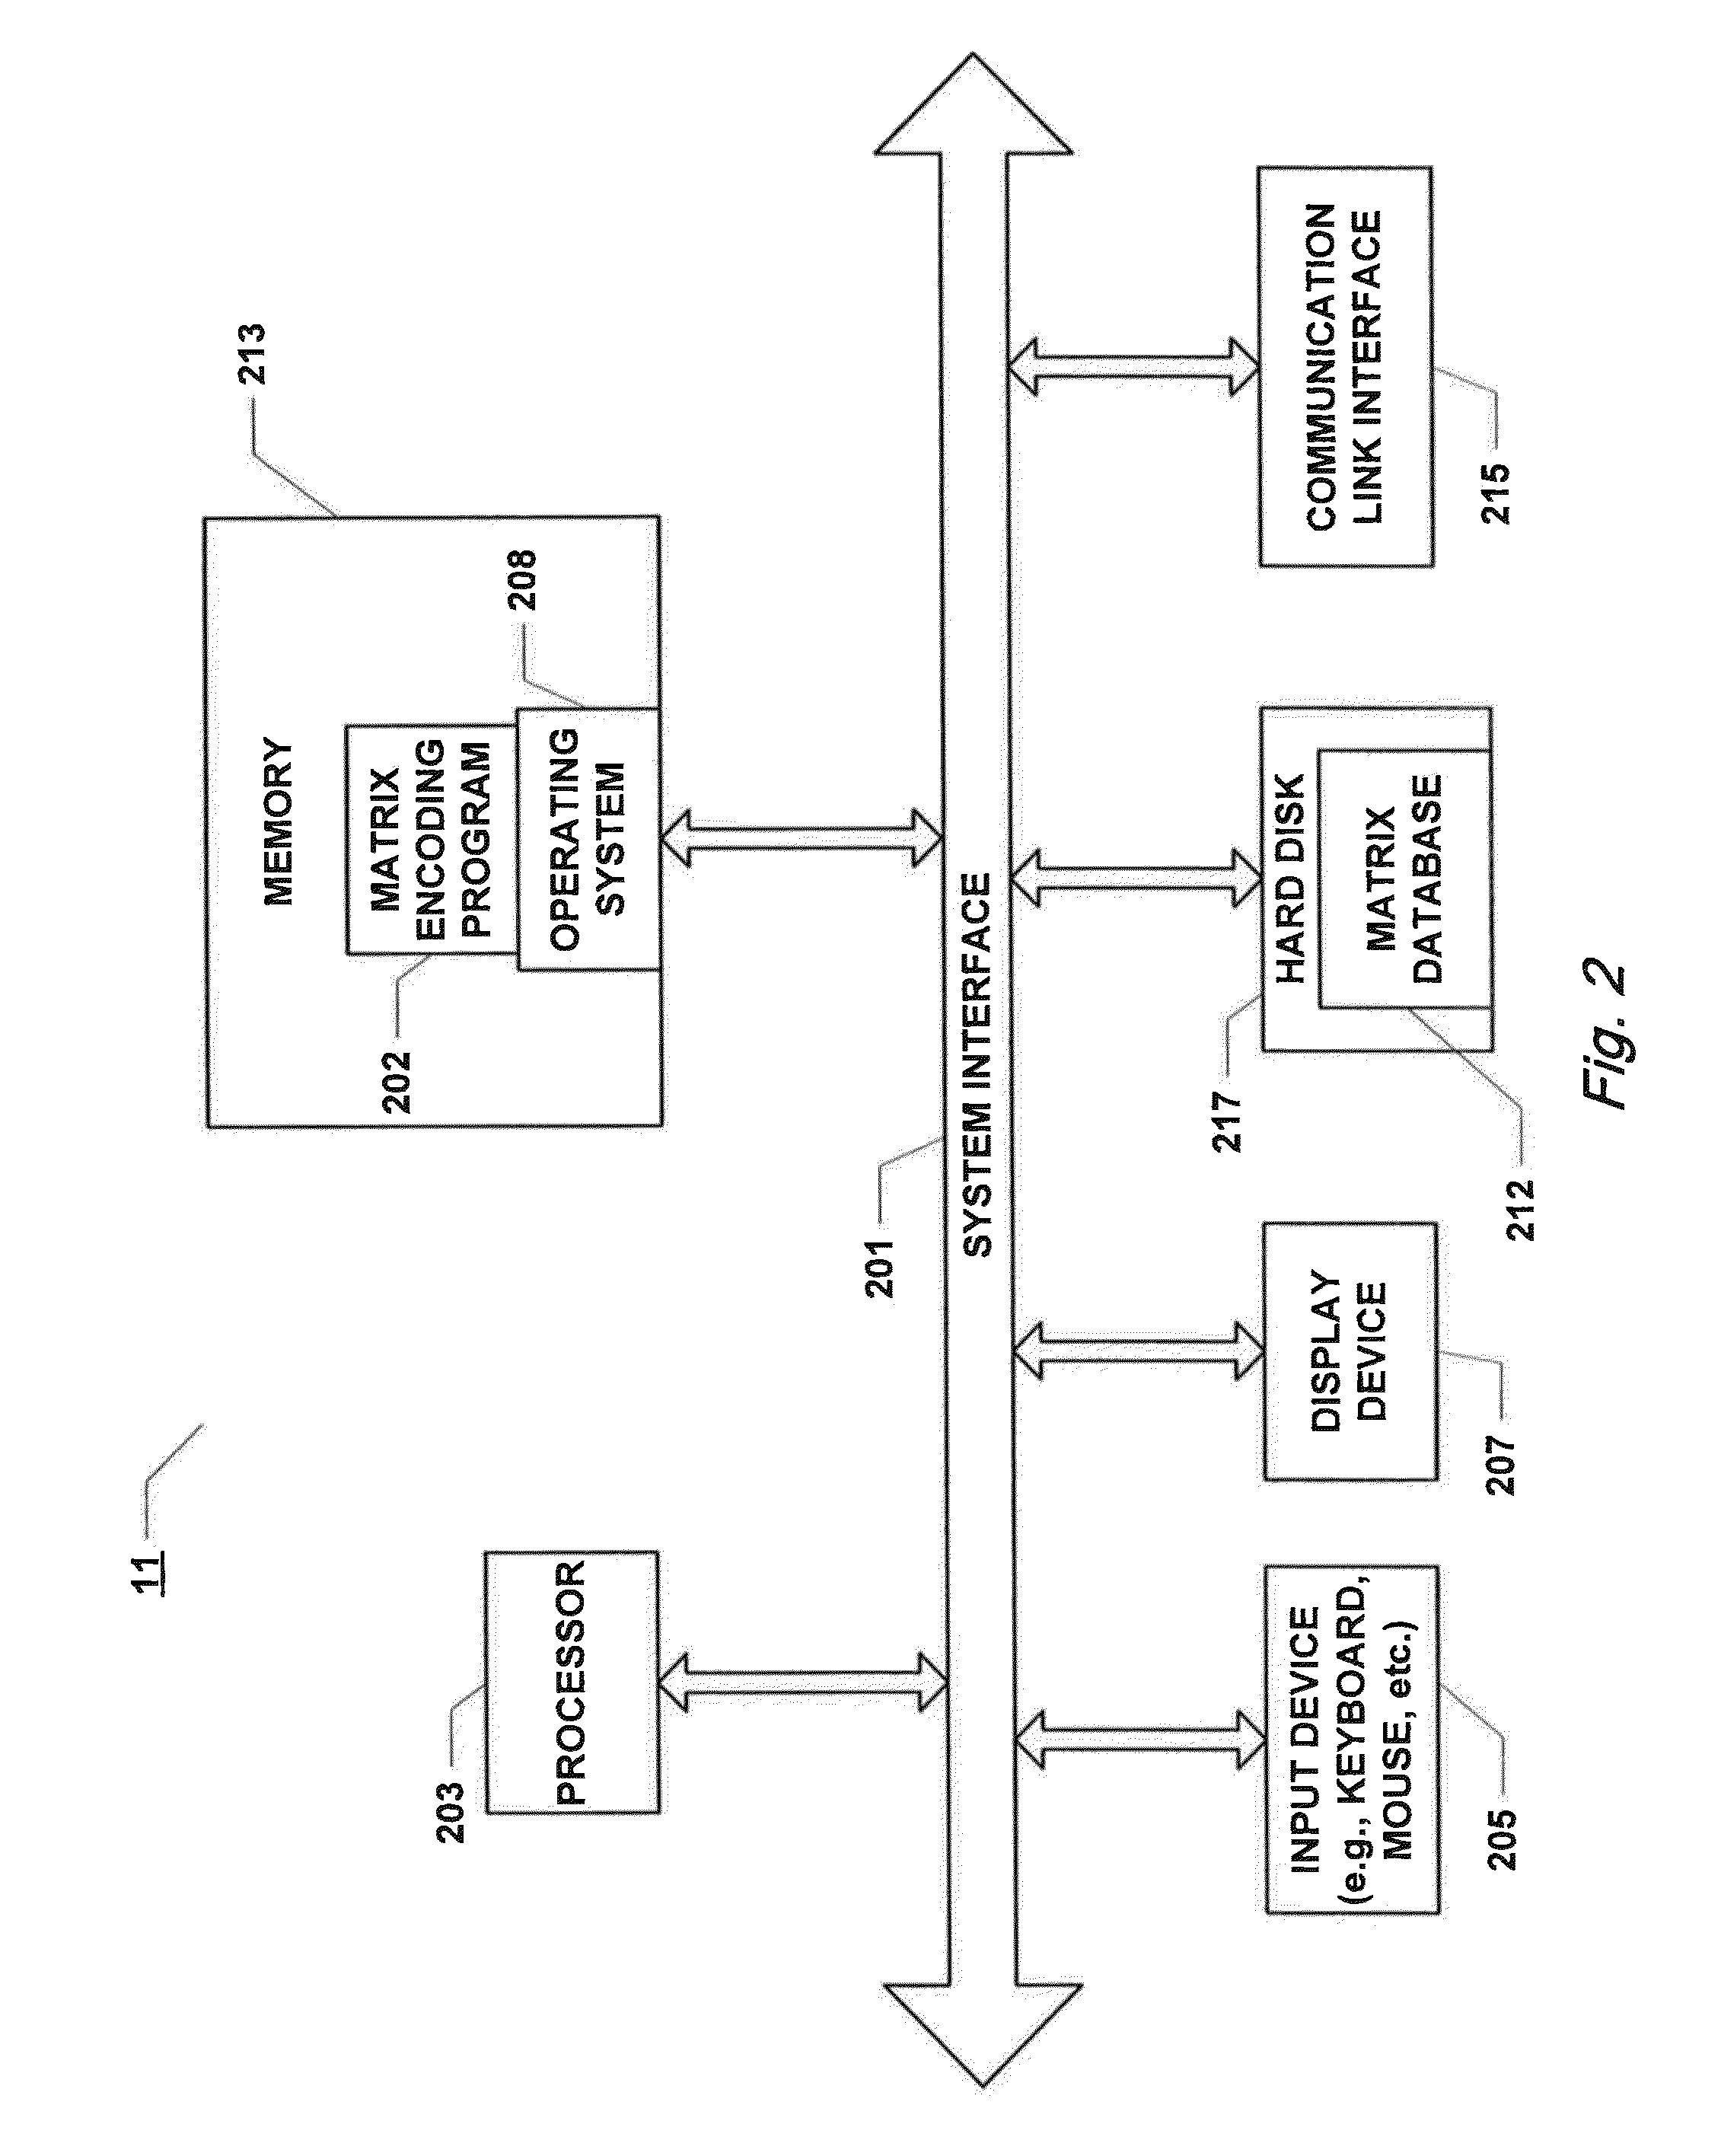 System for Providing Environmental Condition Information to Vehicles and Related Methods